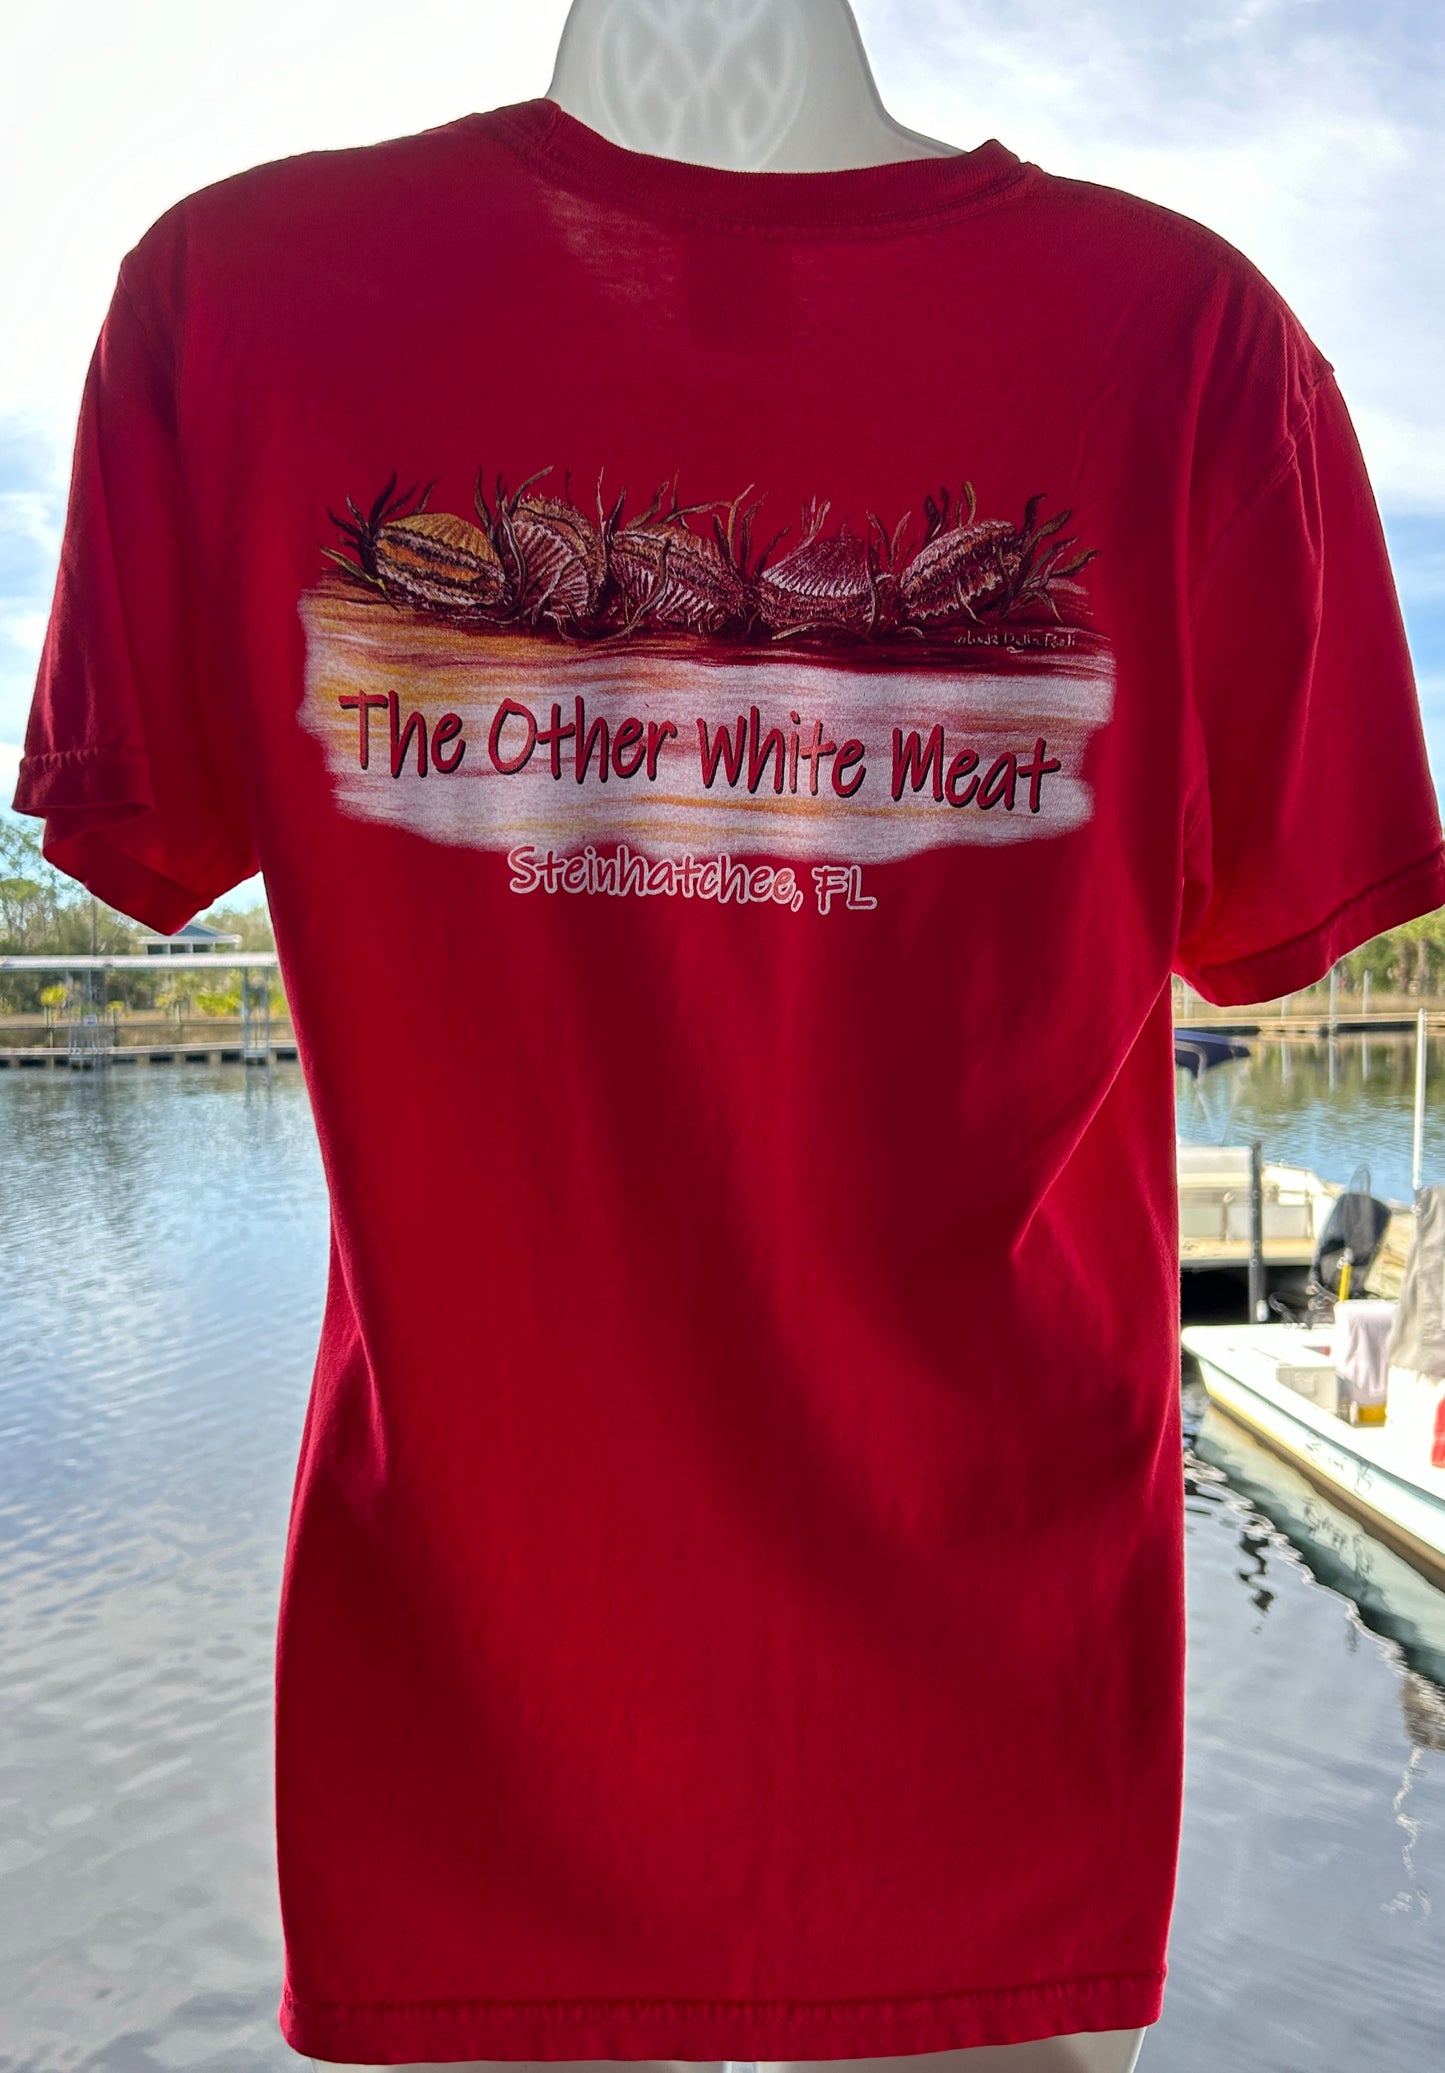 Comfort Colors “The Other White Meat” Steinhatchee Florida TShirt